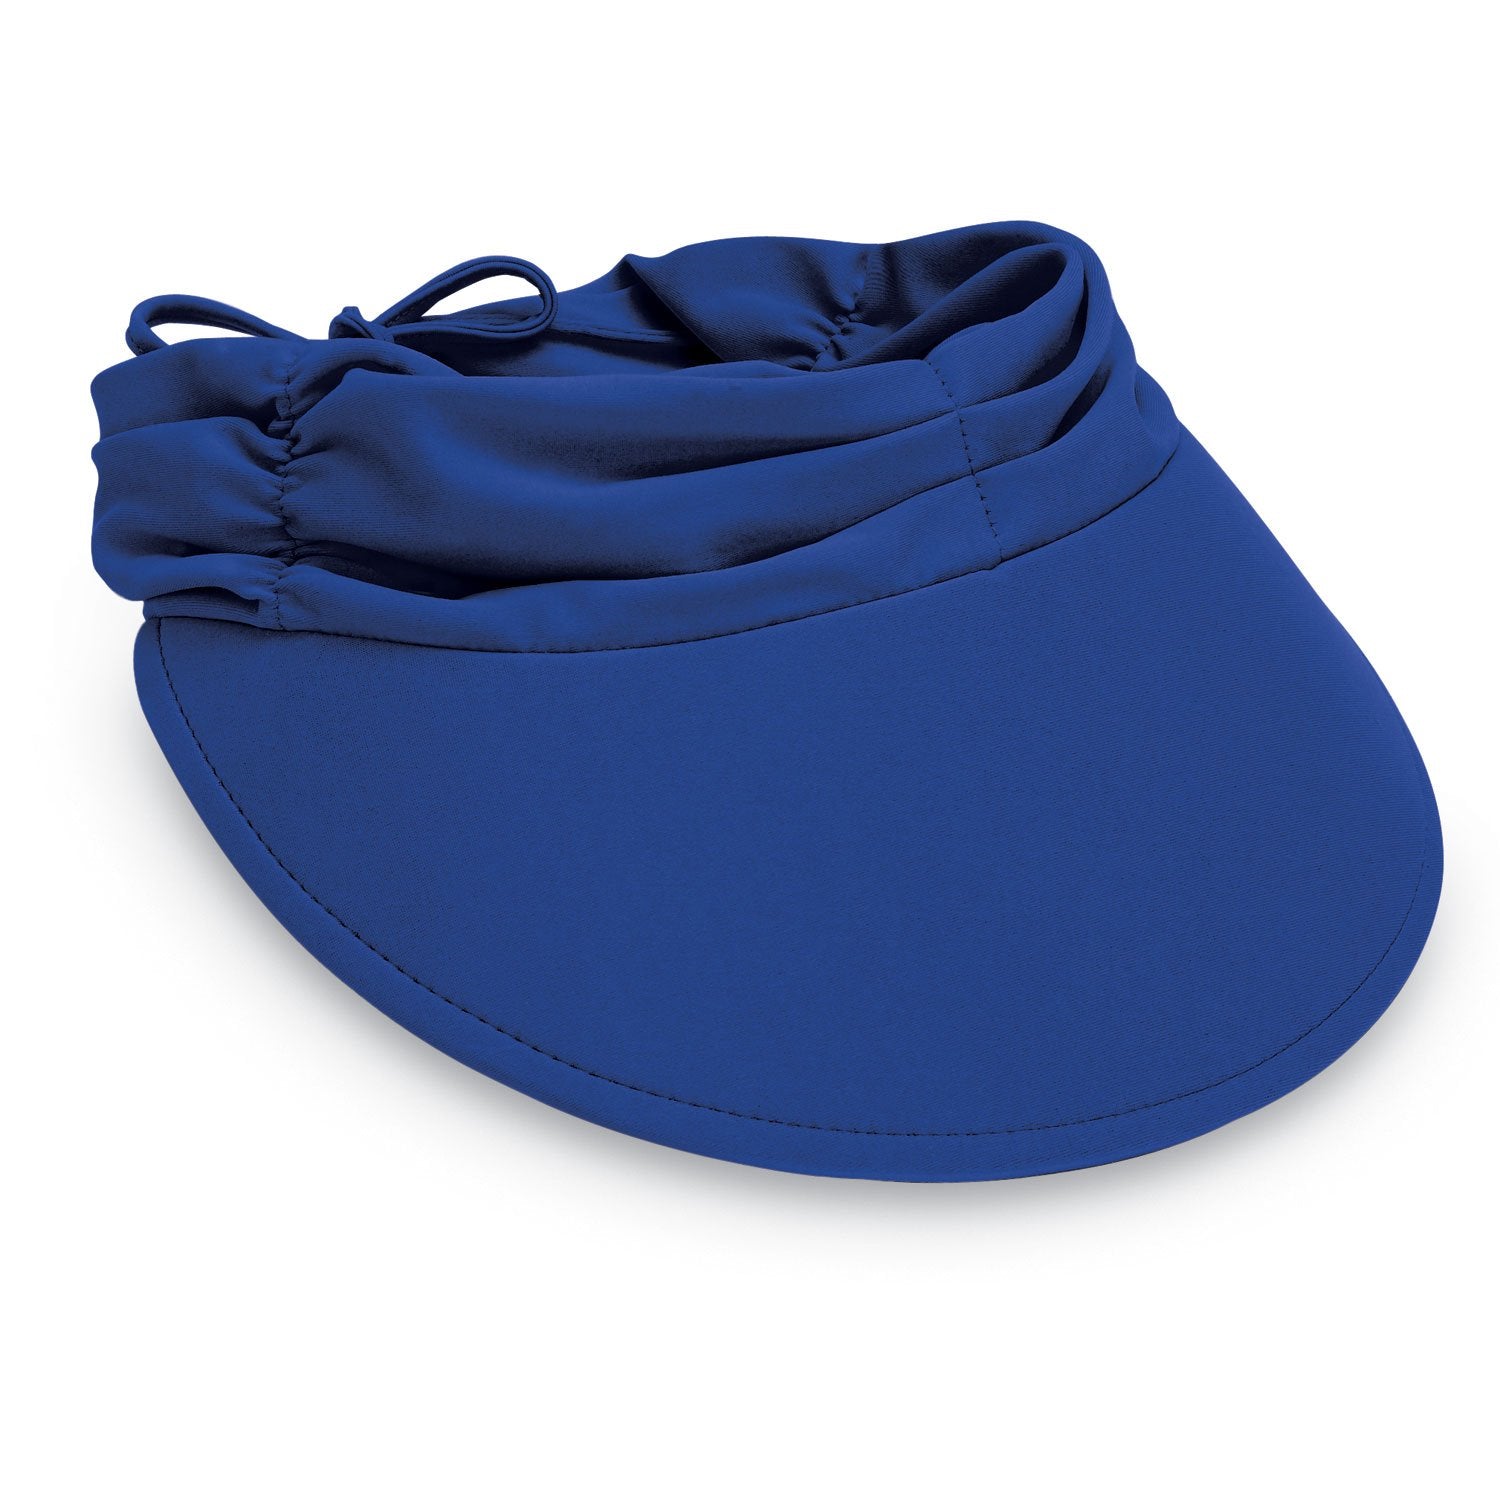 Featuring Women's Packable Sun Aqua Visor for the beach or pool in Royal Blue from Wallaroo